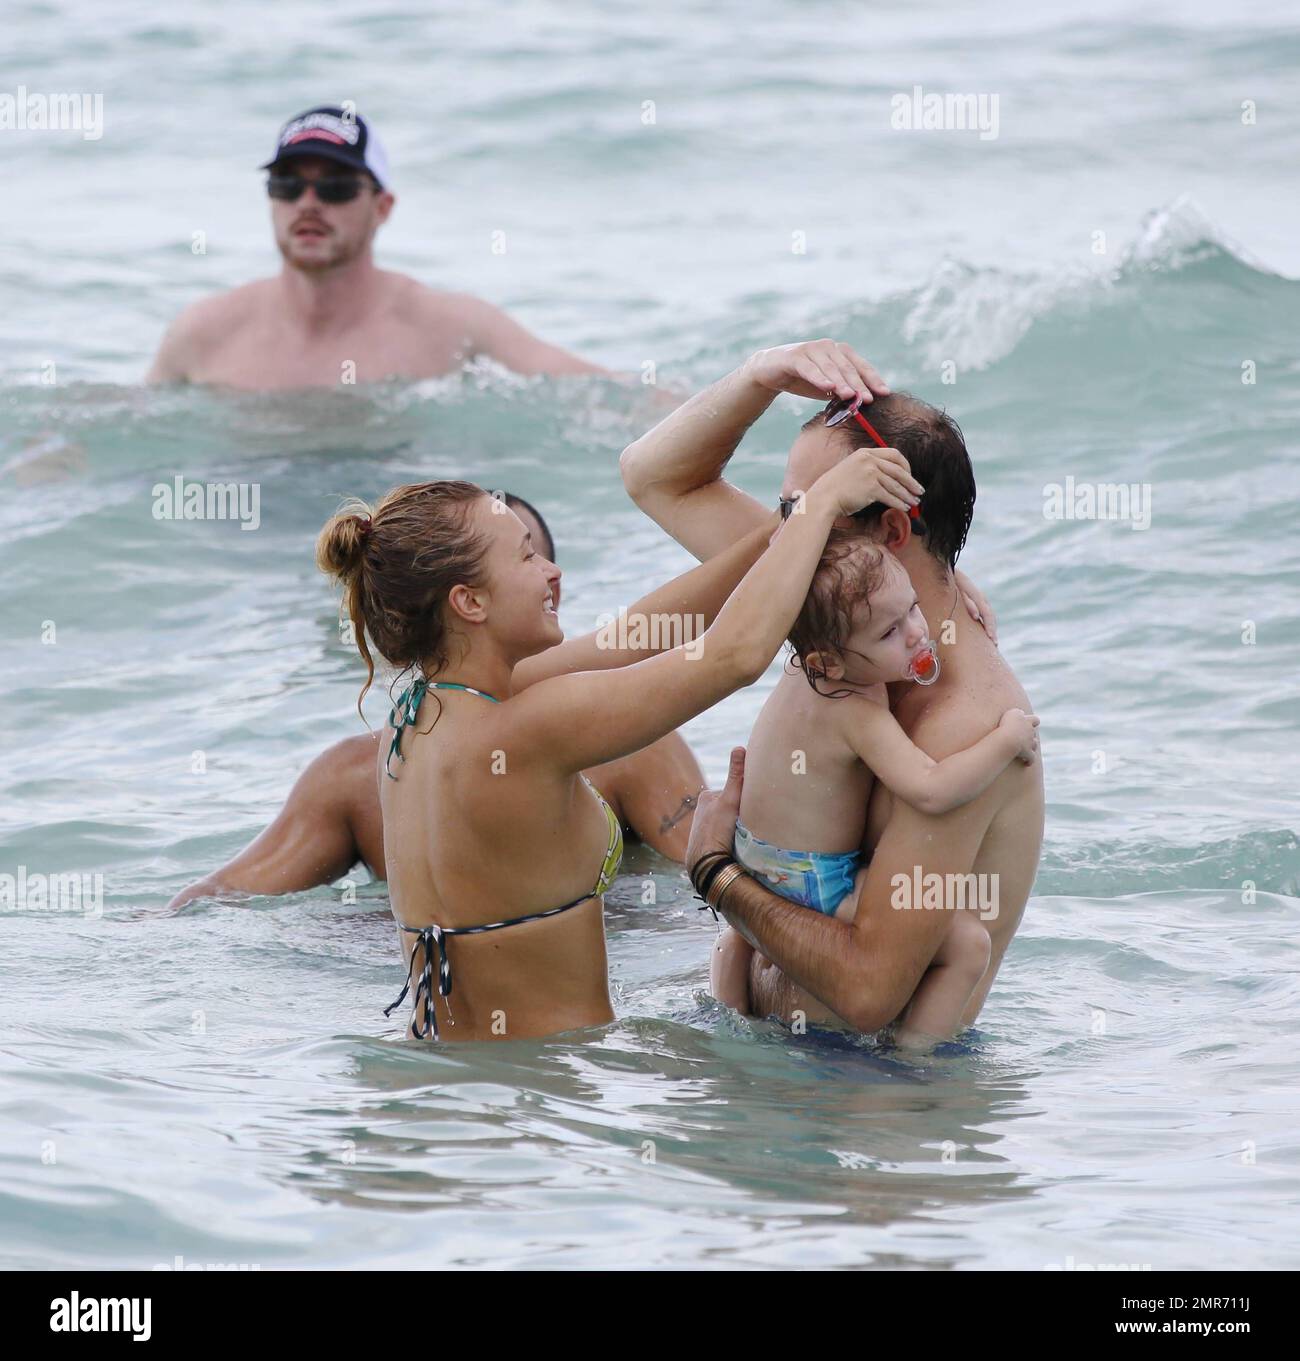 Hayden Panettiere spends Labour Day weekend with friends wearing a colorful bikini and taking a dip in the ocean near her fiancé's beach home. Hayden splashed one over zealous photographer who actually swam up to her in the ocean with his video camera. After drinking a few cocktails and beer, the petite actress swam back along the shore to her condo. Hollywood Beach, FL. 1st September 2013 . Stock Photo